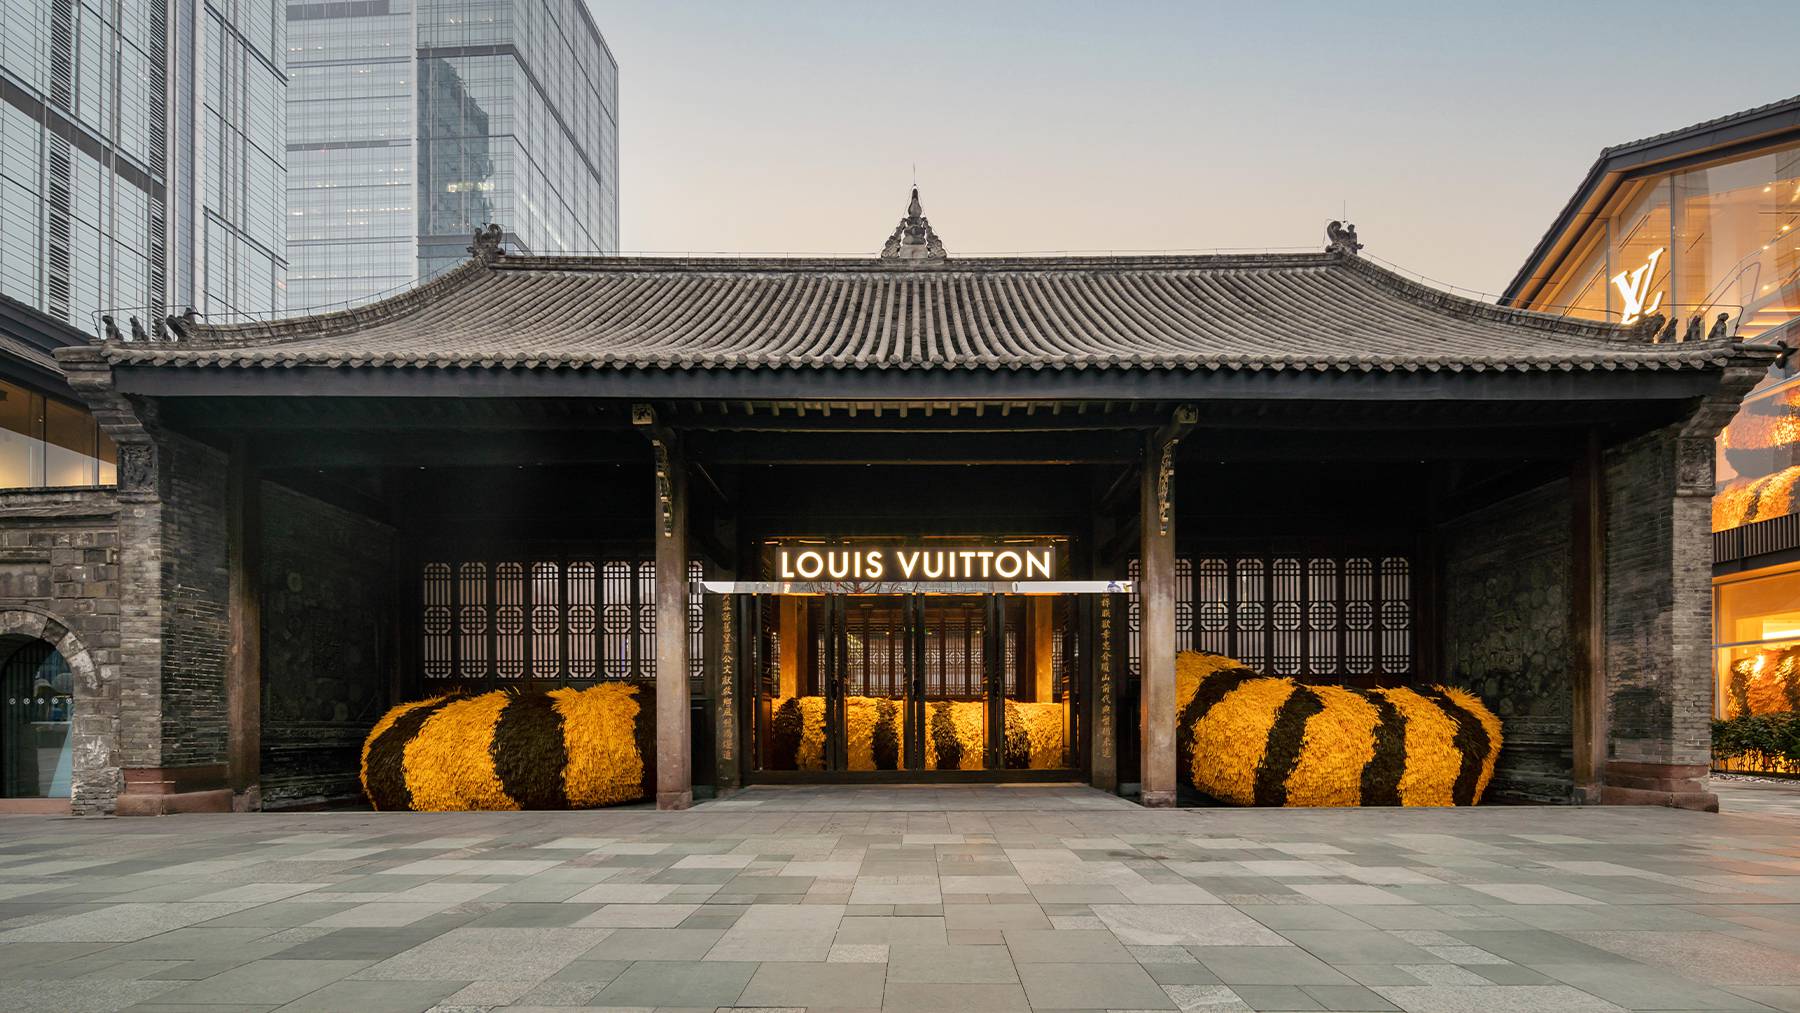 Chengdu Louis Vuitton boutique with a tigers tail made out of flowers weaving through the store exterior.